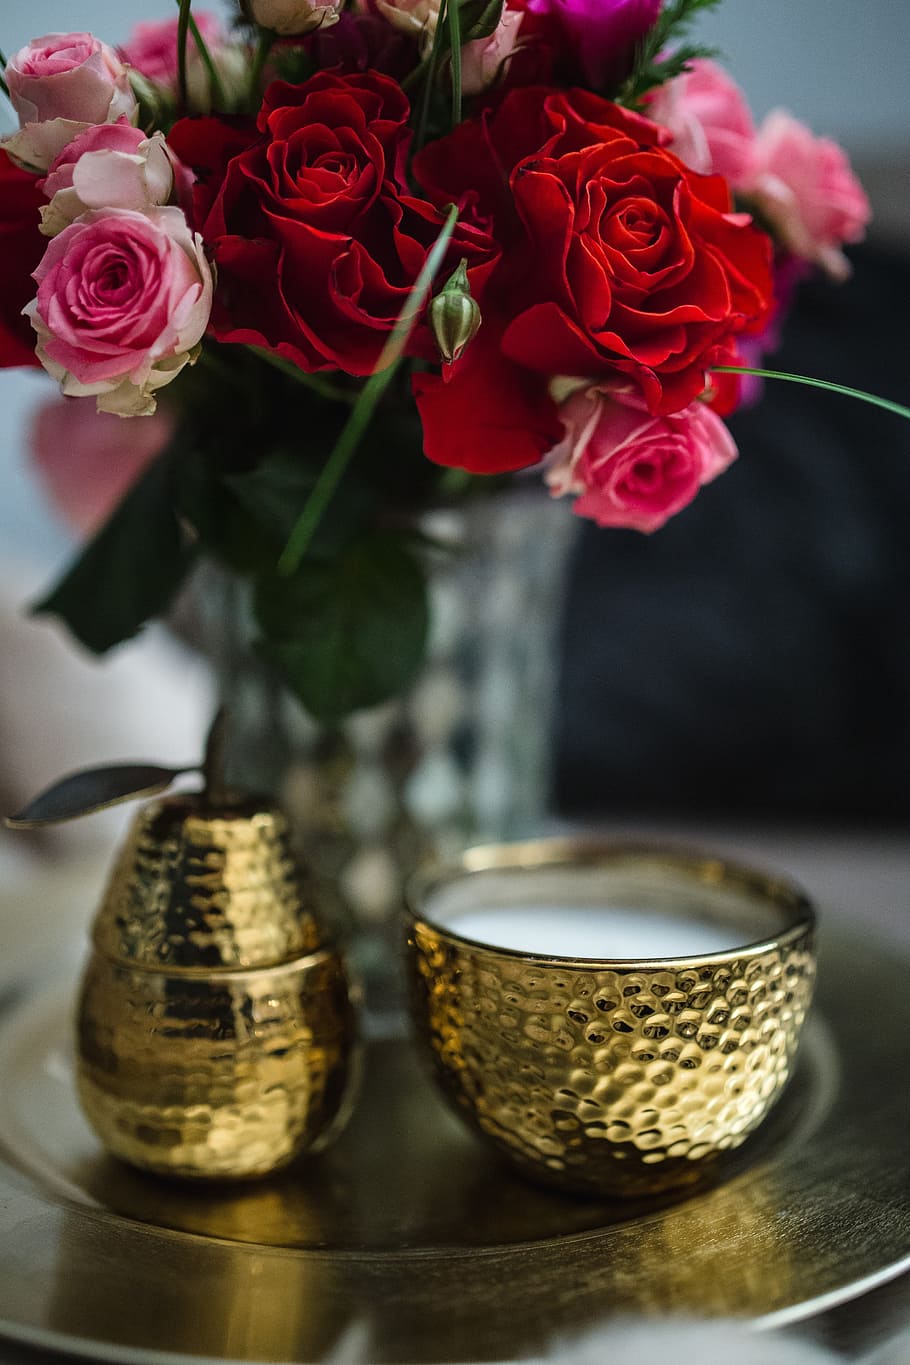 bouquet, flowers, candles, roses, lovely, gold, golden, romantic, decorations, pink